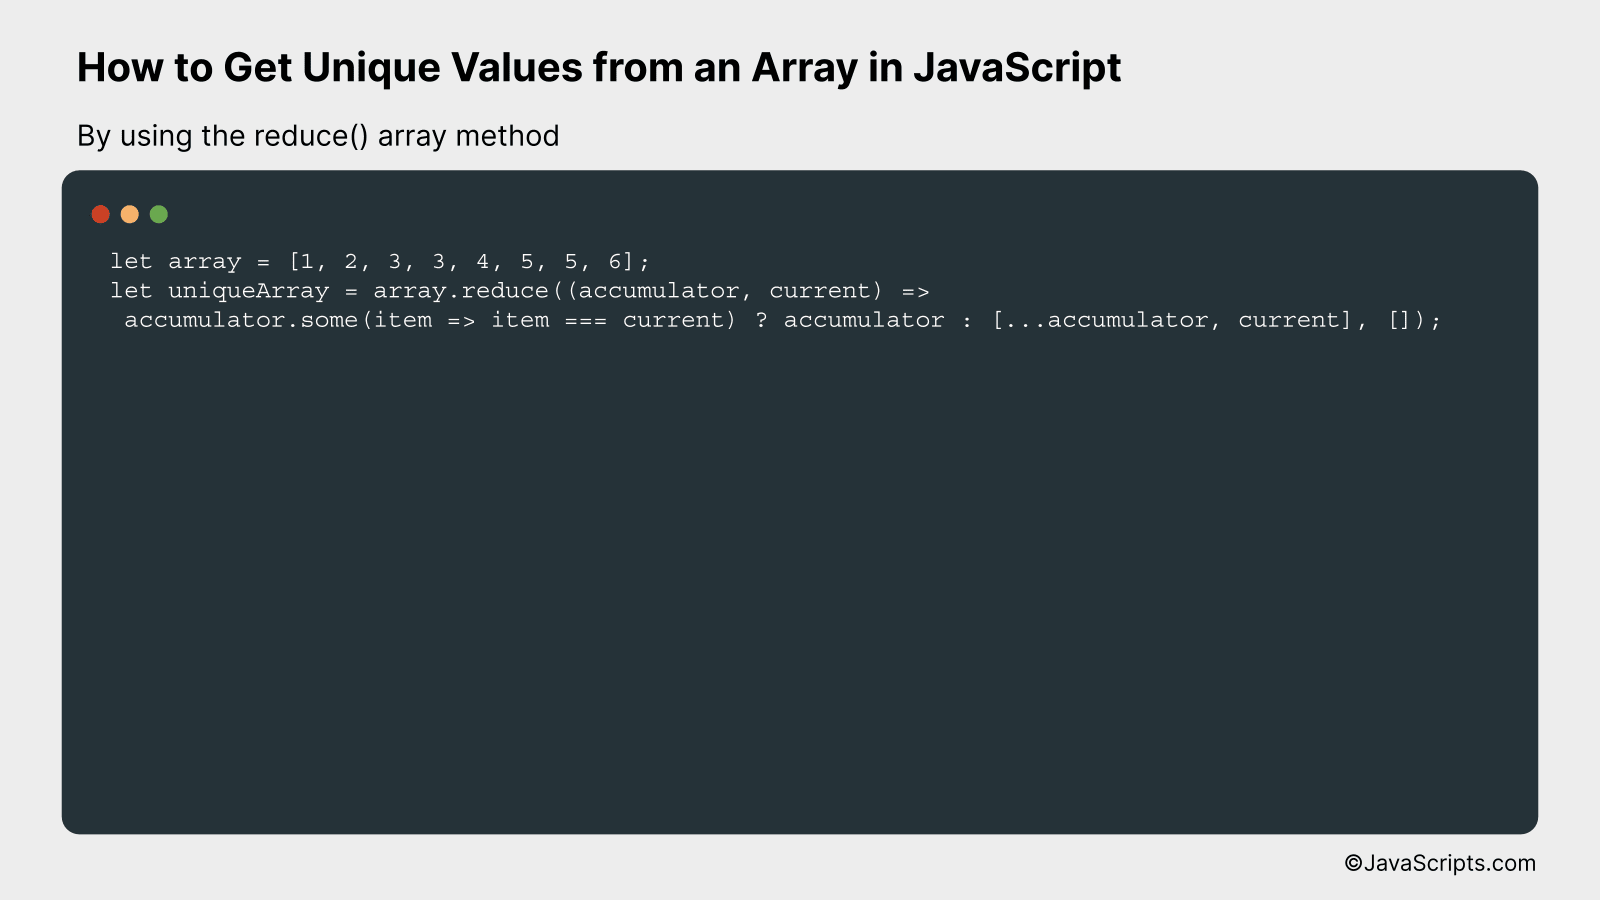 By using the reduce() array method